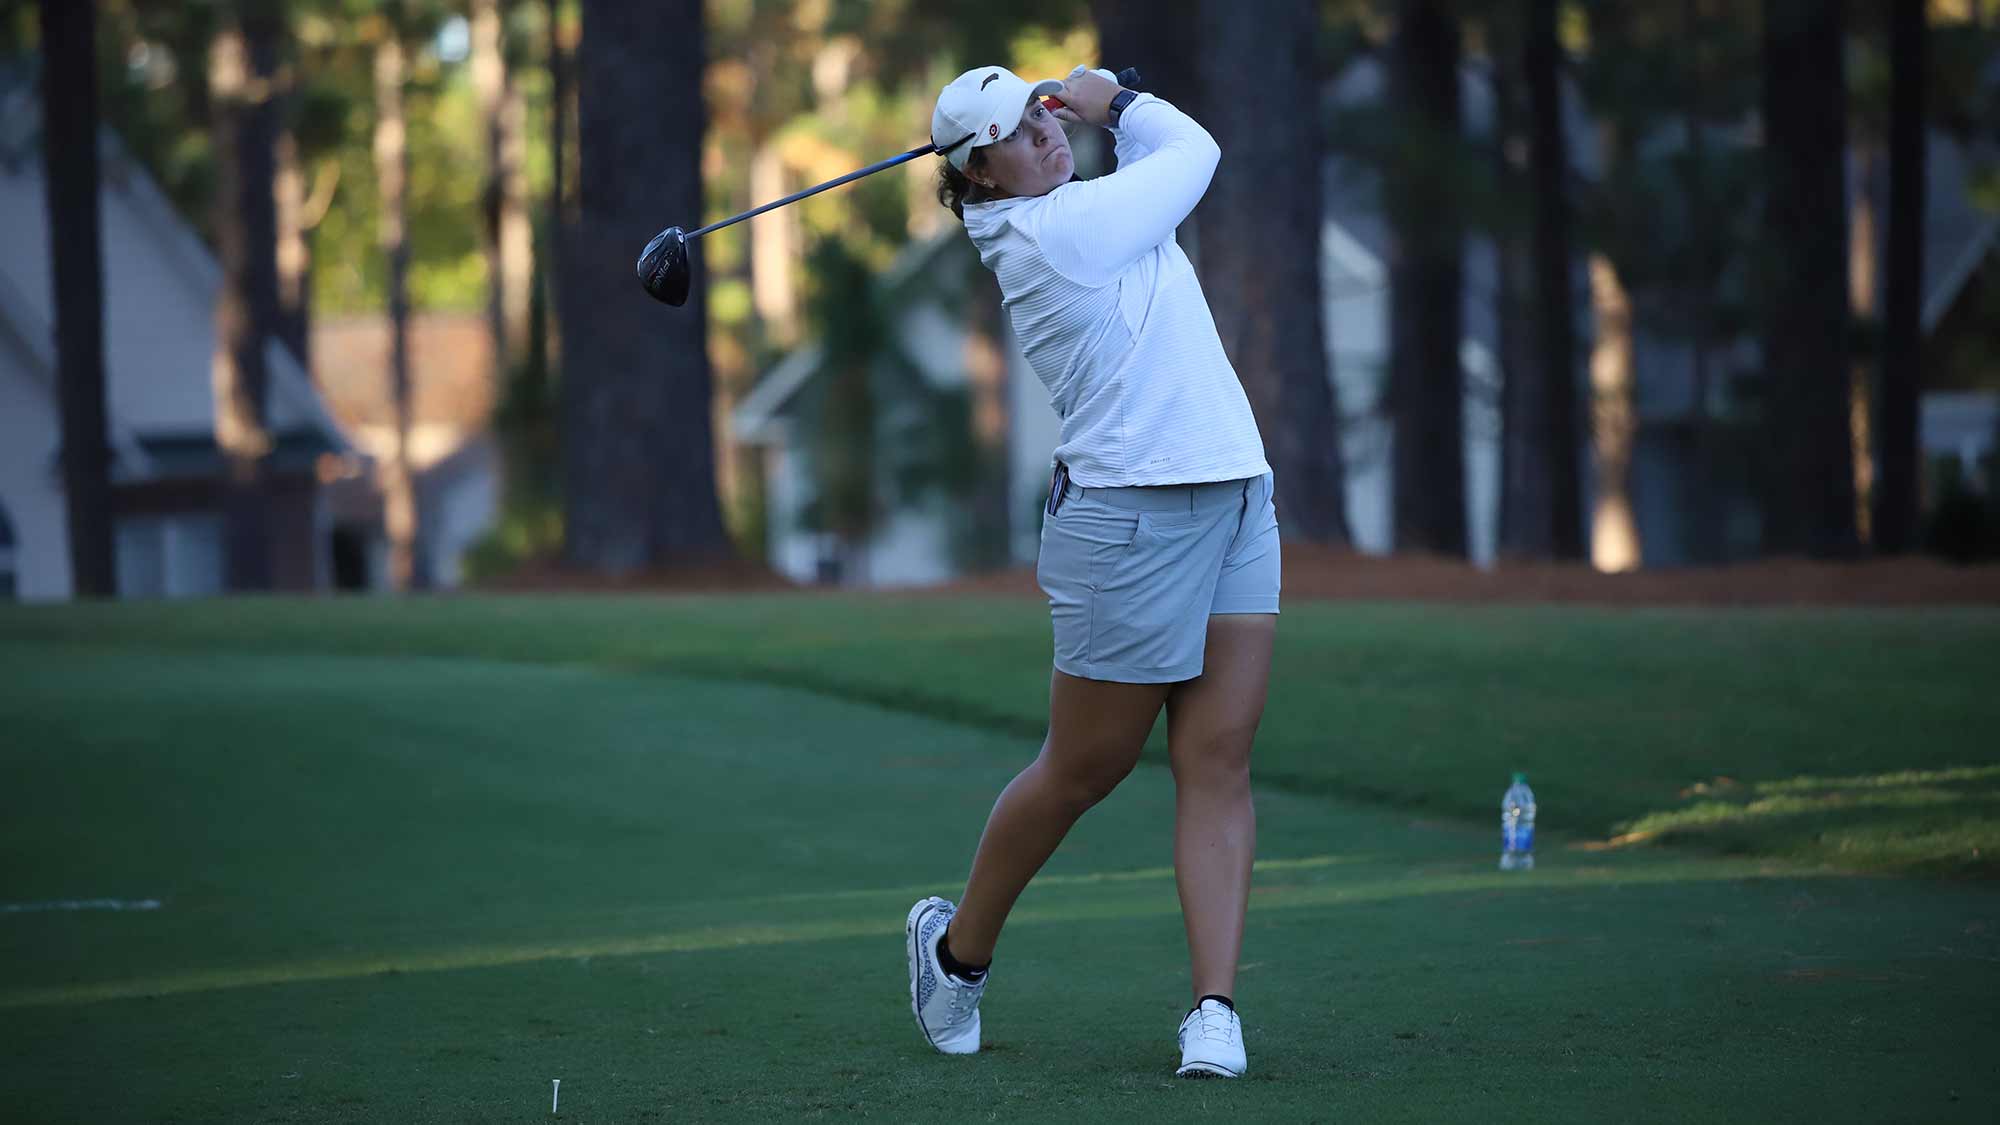 Lauren Coughlin hits a shot during the first round of the 2019 LPGA Q-Series at Pinehurst Resort